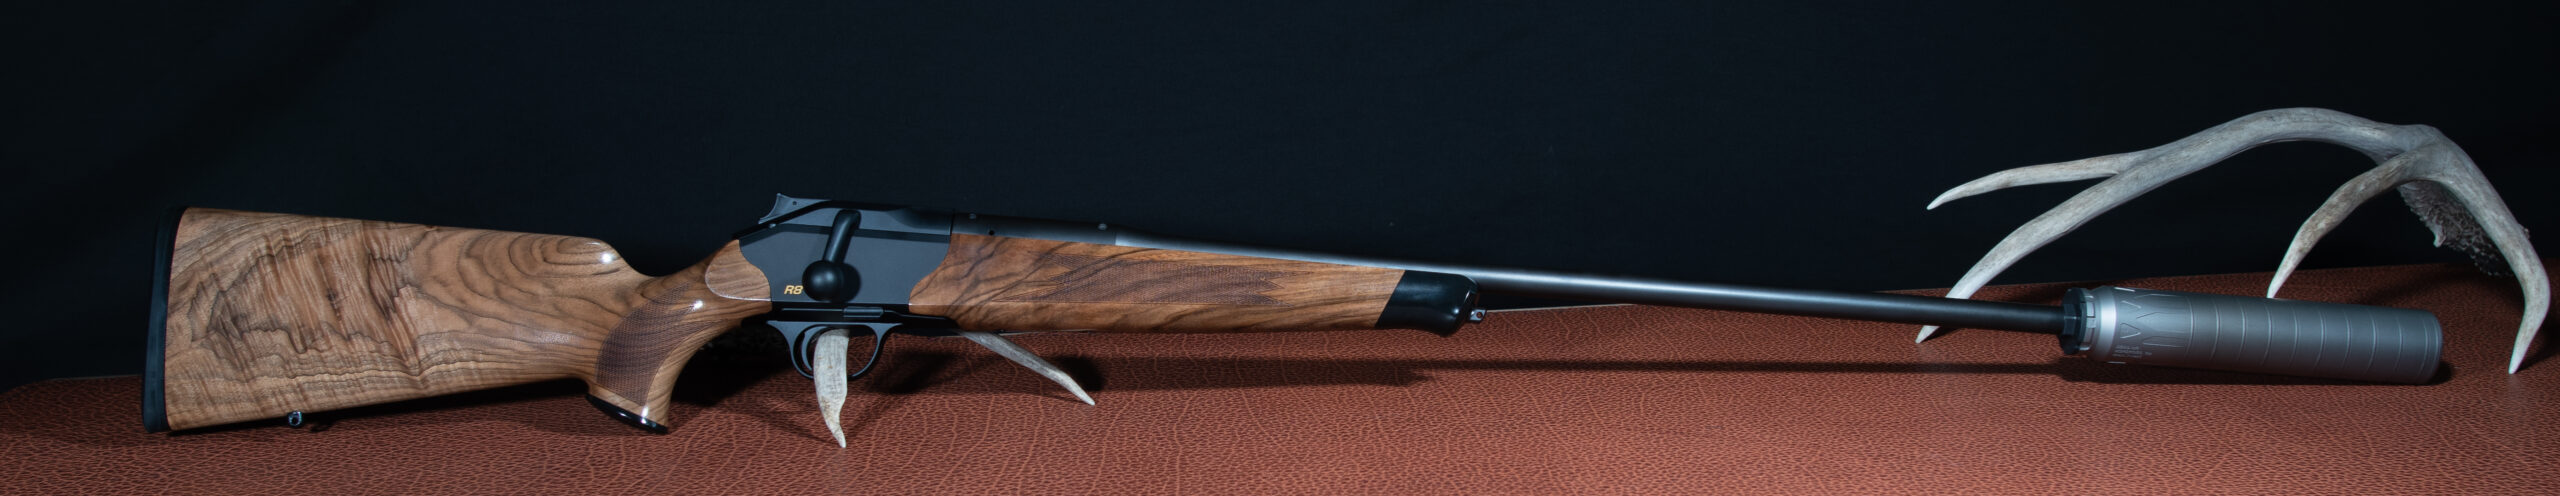 Gallery of Arms Blaser R8 300 win mag Dead Air nomad TI Bespoke Park City